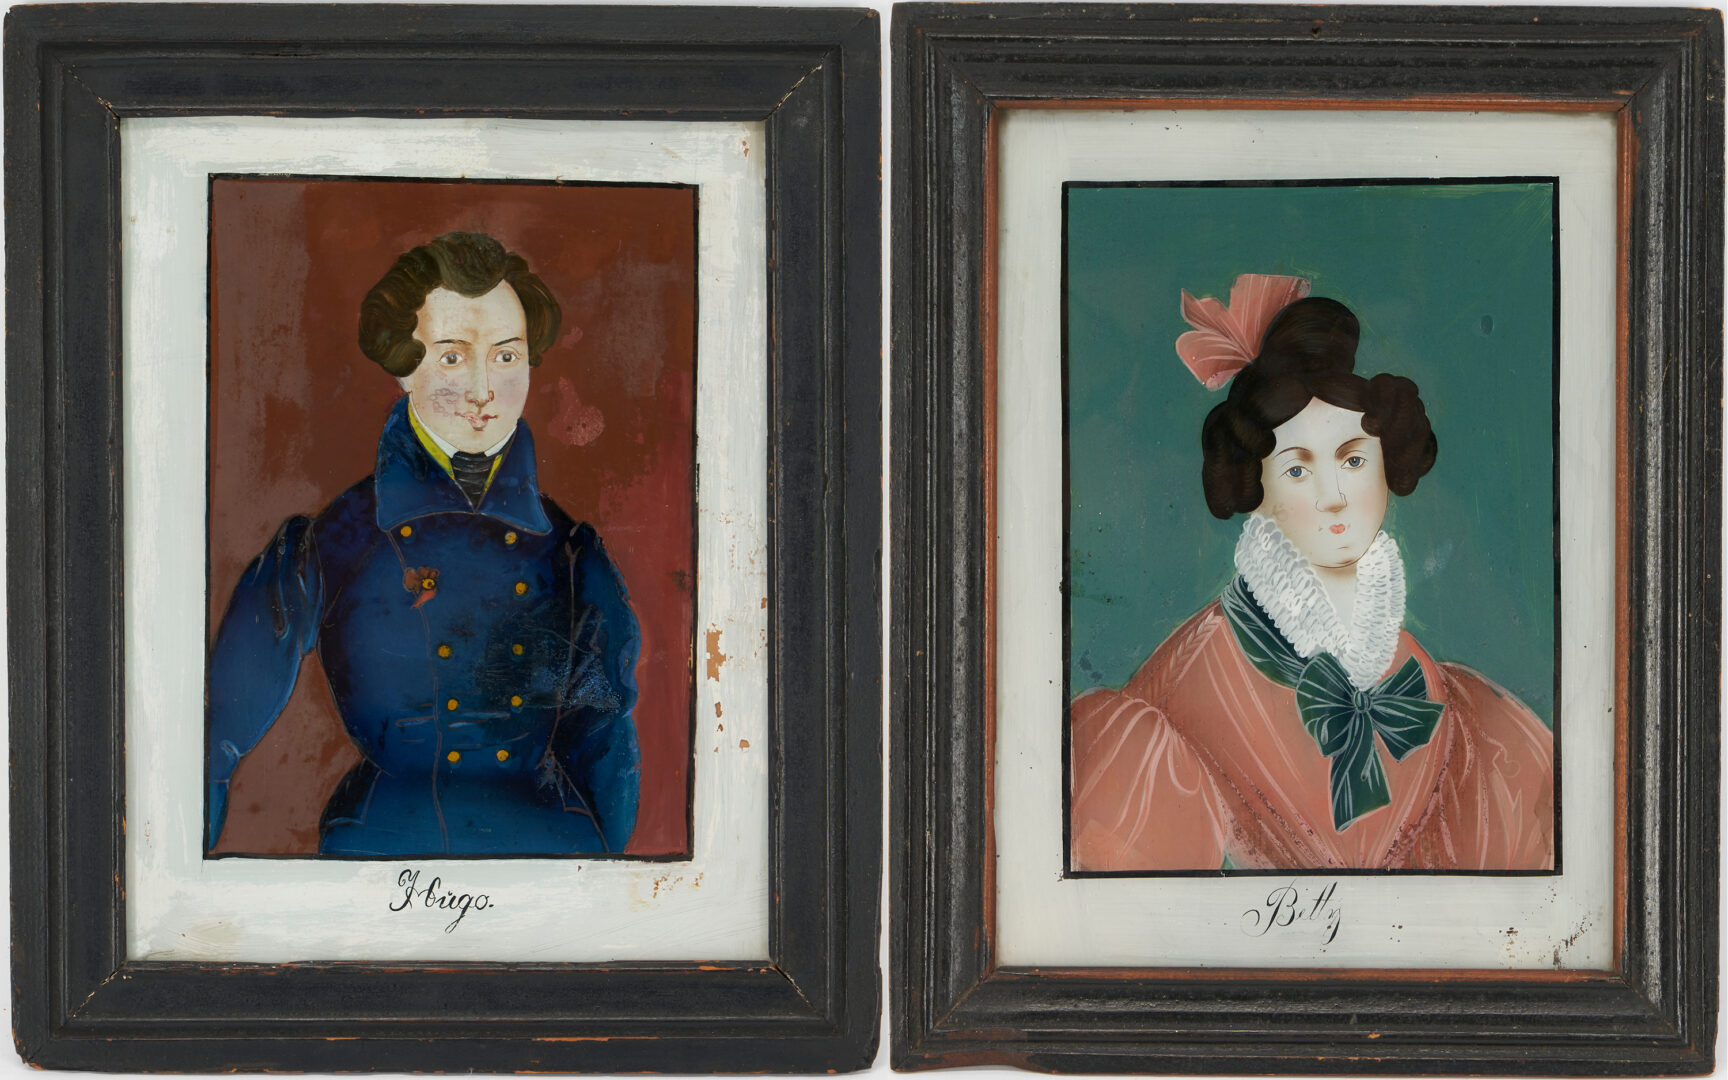 Lot 1068: Pair of 19th Century Eglomise Painted Portraits